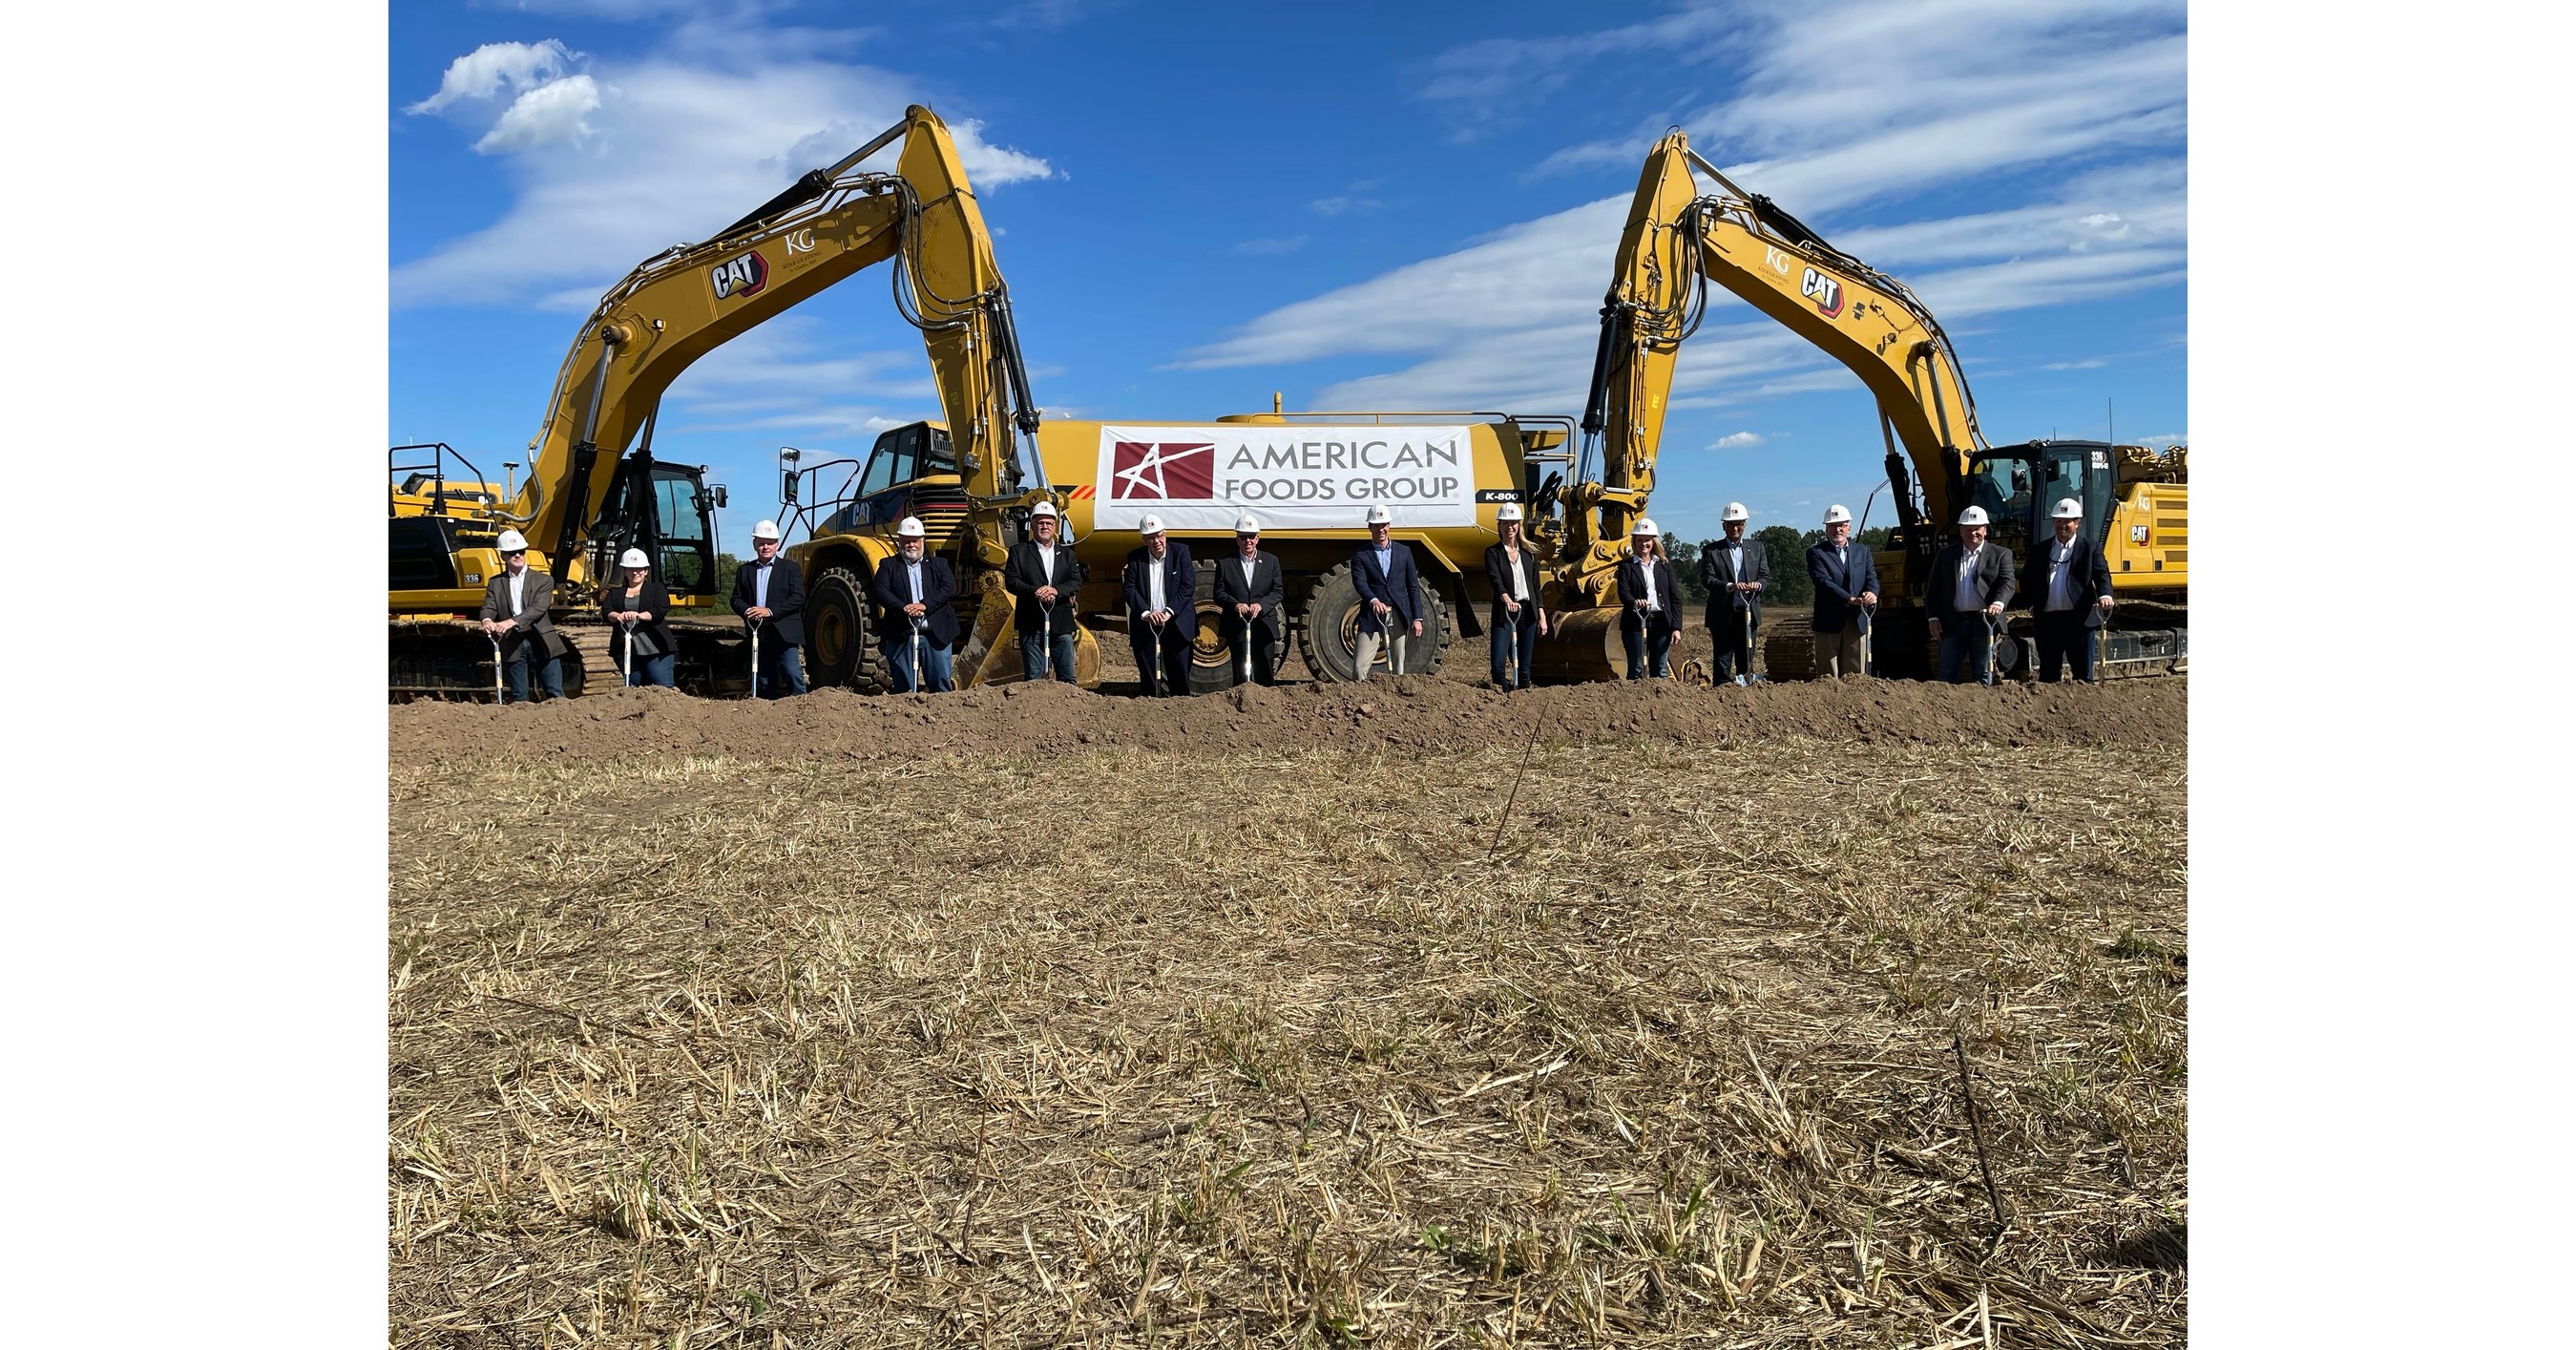 American Foods Group Breaks Ground on New $800 Million Facility in Missouri